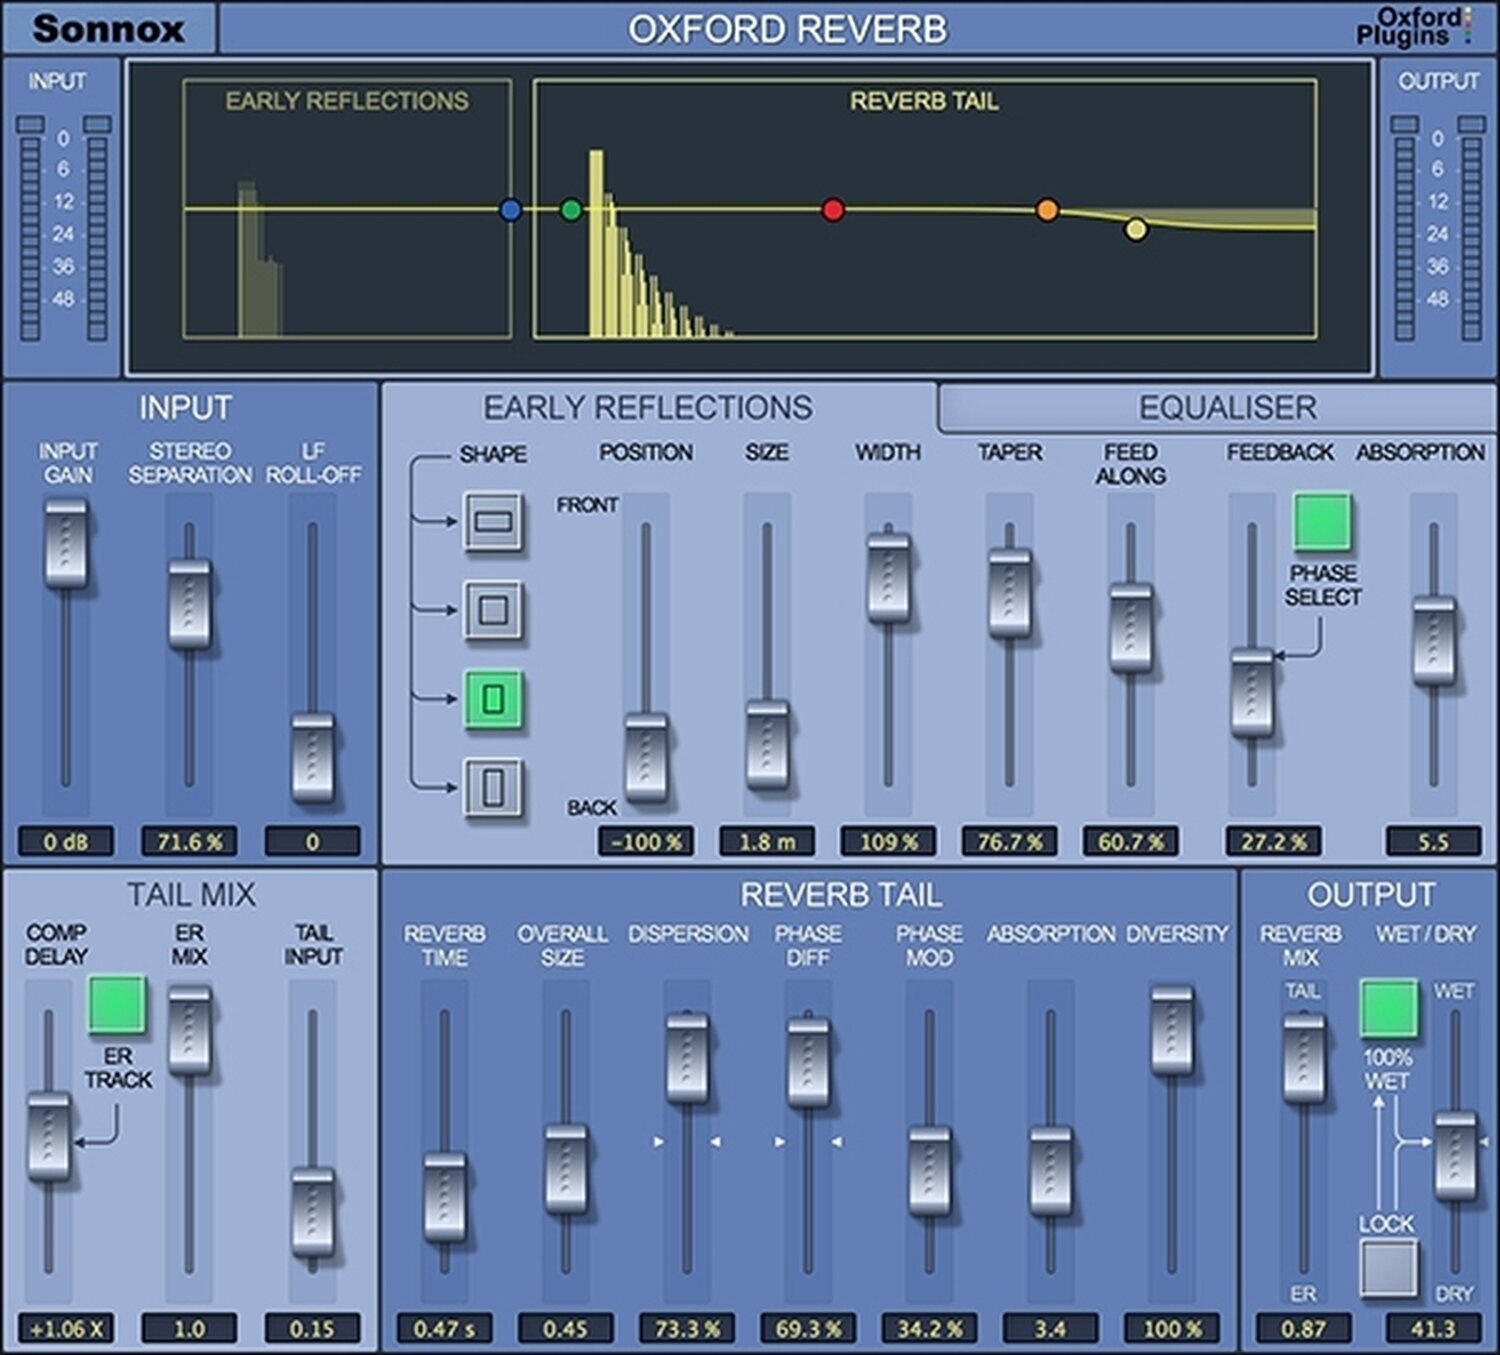 Studio software plug-in effect Sonnox Oxford Reverb (Native) (Digitaal product)